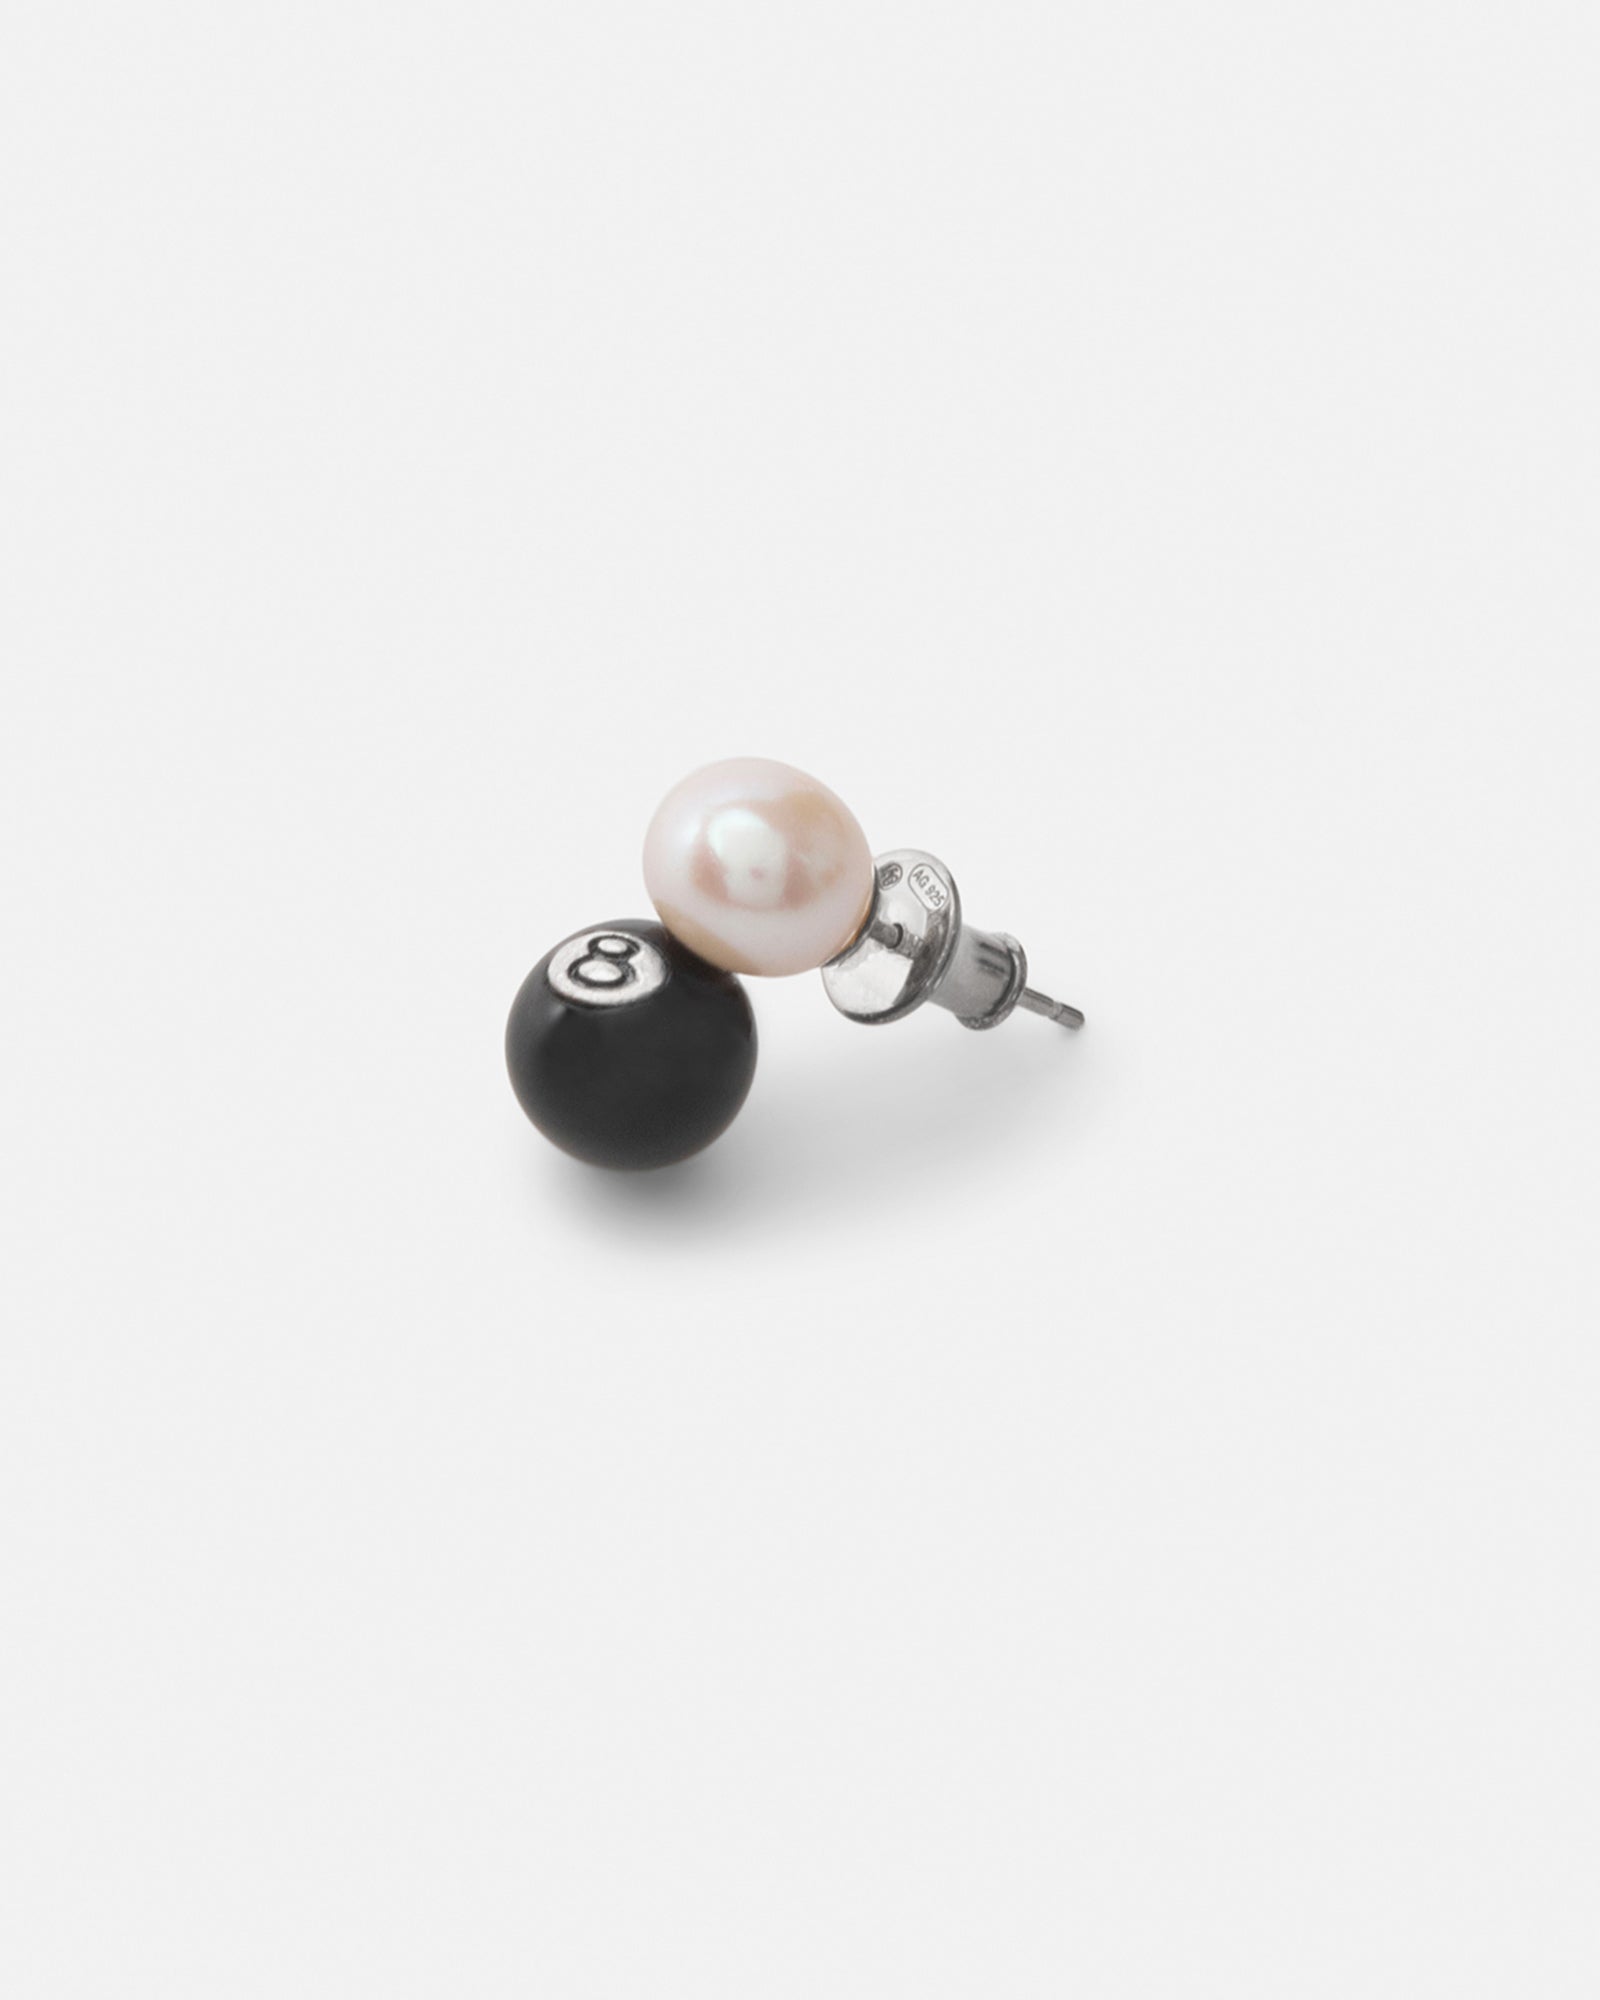 STUSSY SILVER PEARL 8 BALL STACK EARRING SILVERY ACCESSORY